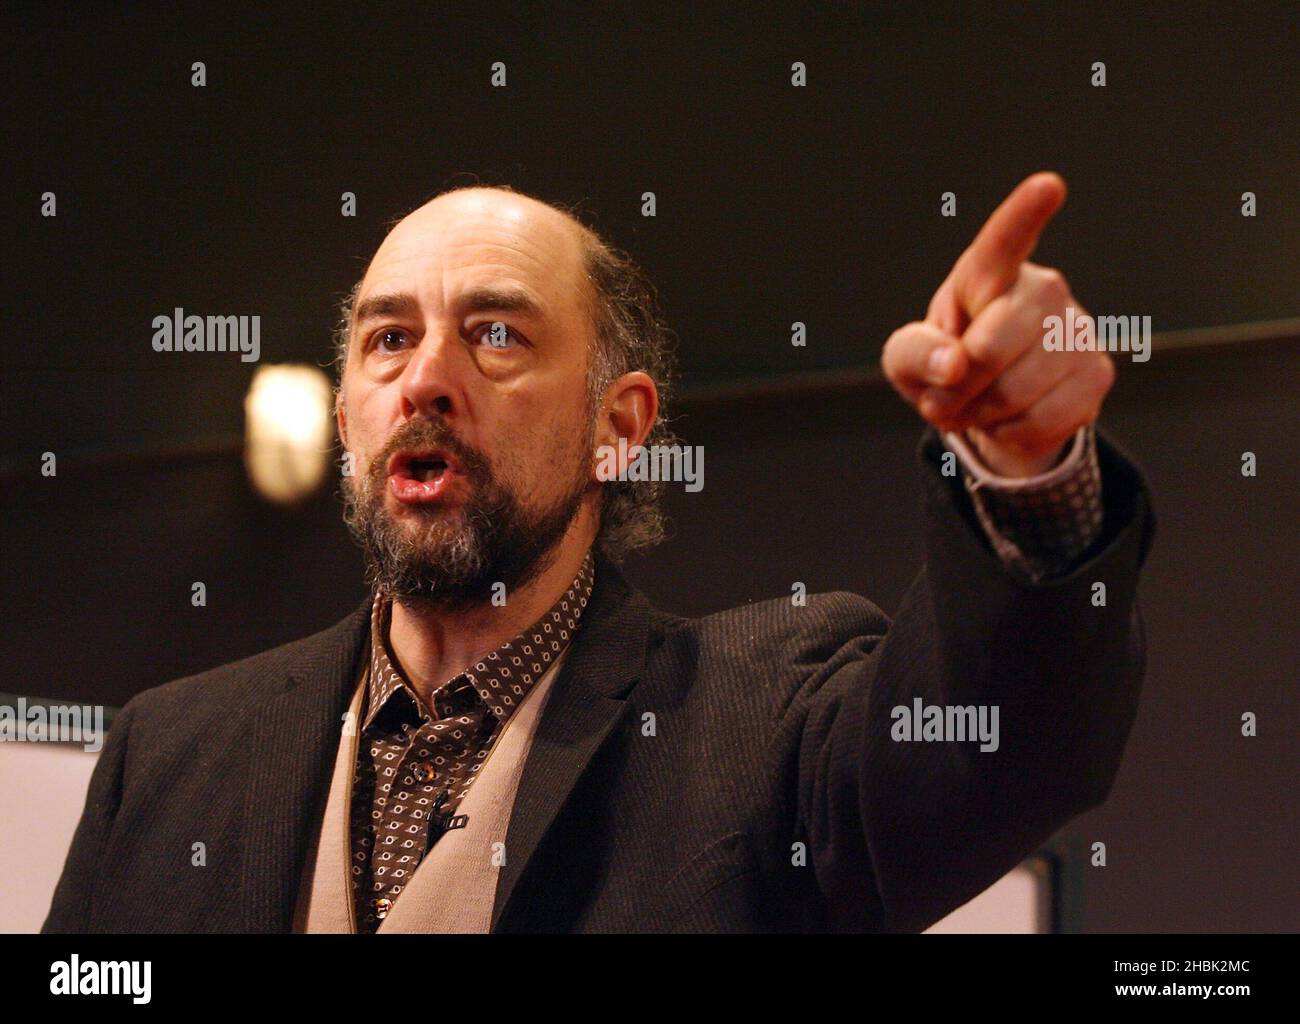 Michael Edwards and Carole Winter with Paul Coxwell present Richard Schiff starring in the British Premiere of 'Underneath the Lintel' by Glen Berger at the Duchess Theatre in London on February 9, 2007.  Entertainment *** Local Caption *** Stock Photo